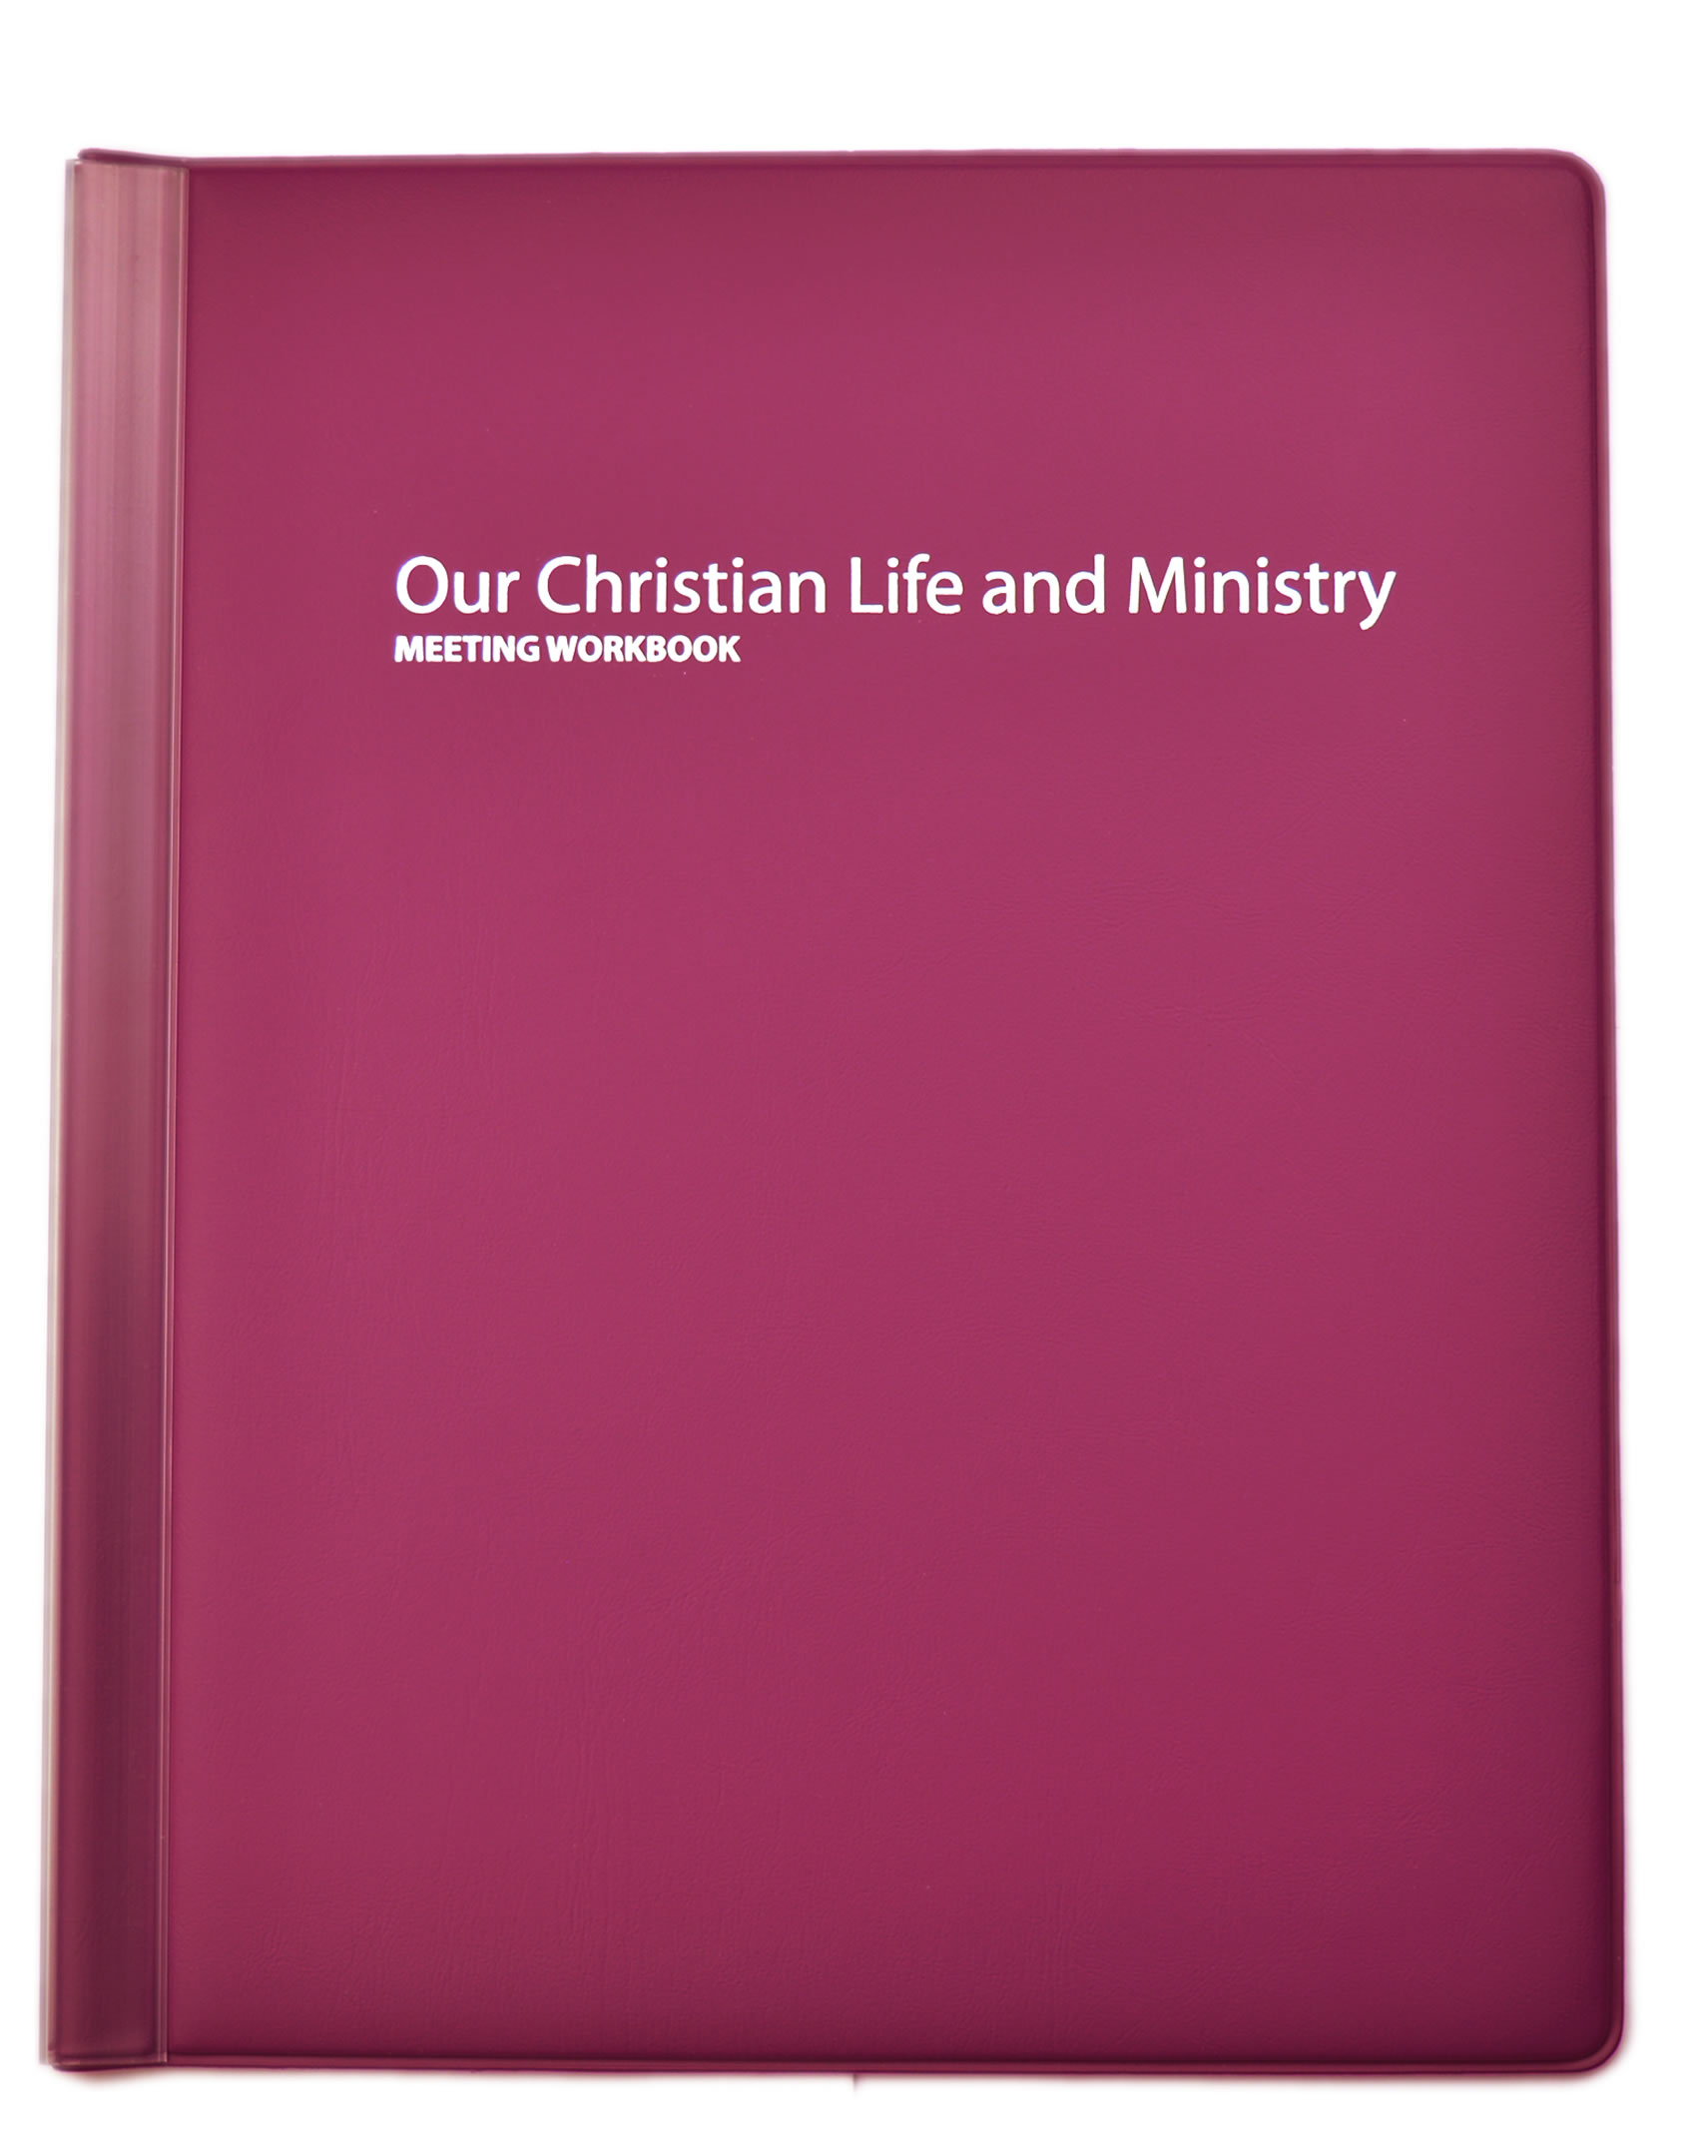 NEW Our Christian Life and Ministry Meeting Workbook Folder PLUM